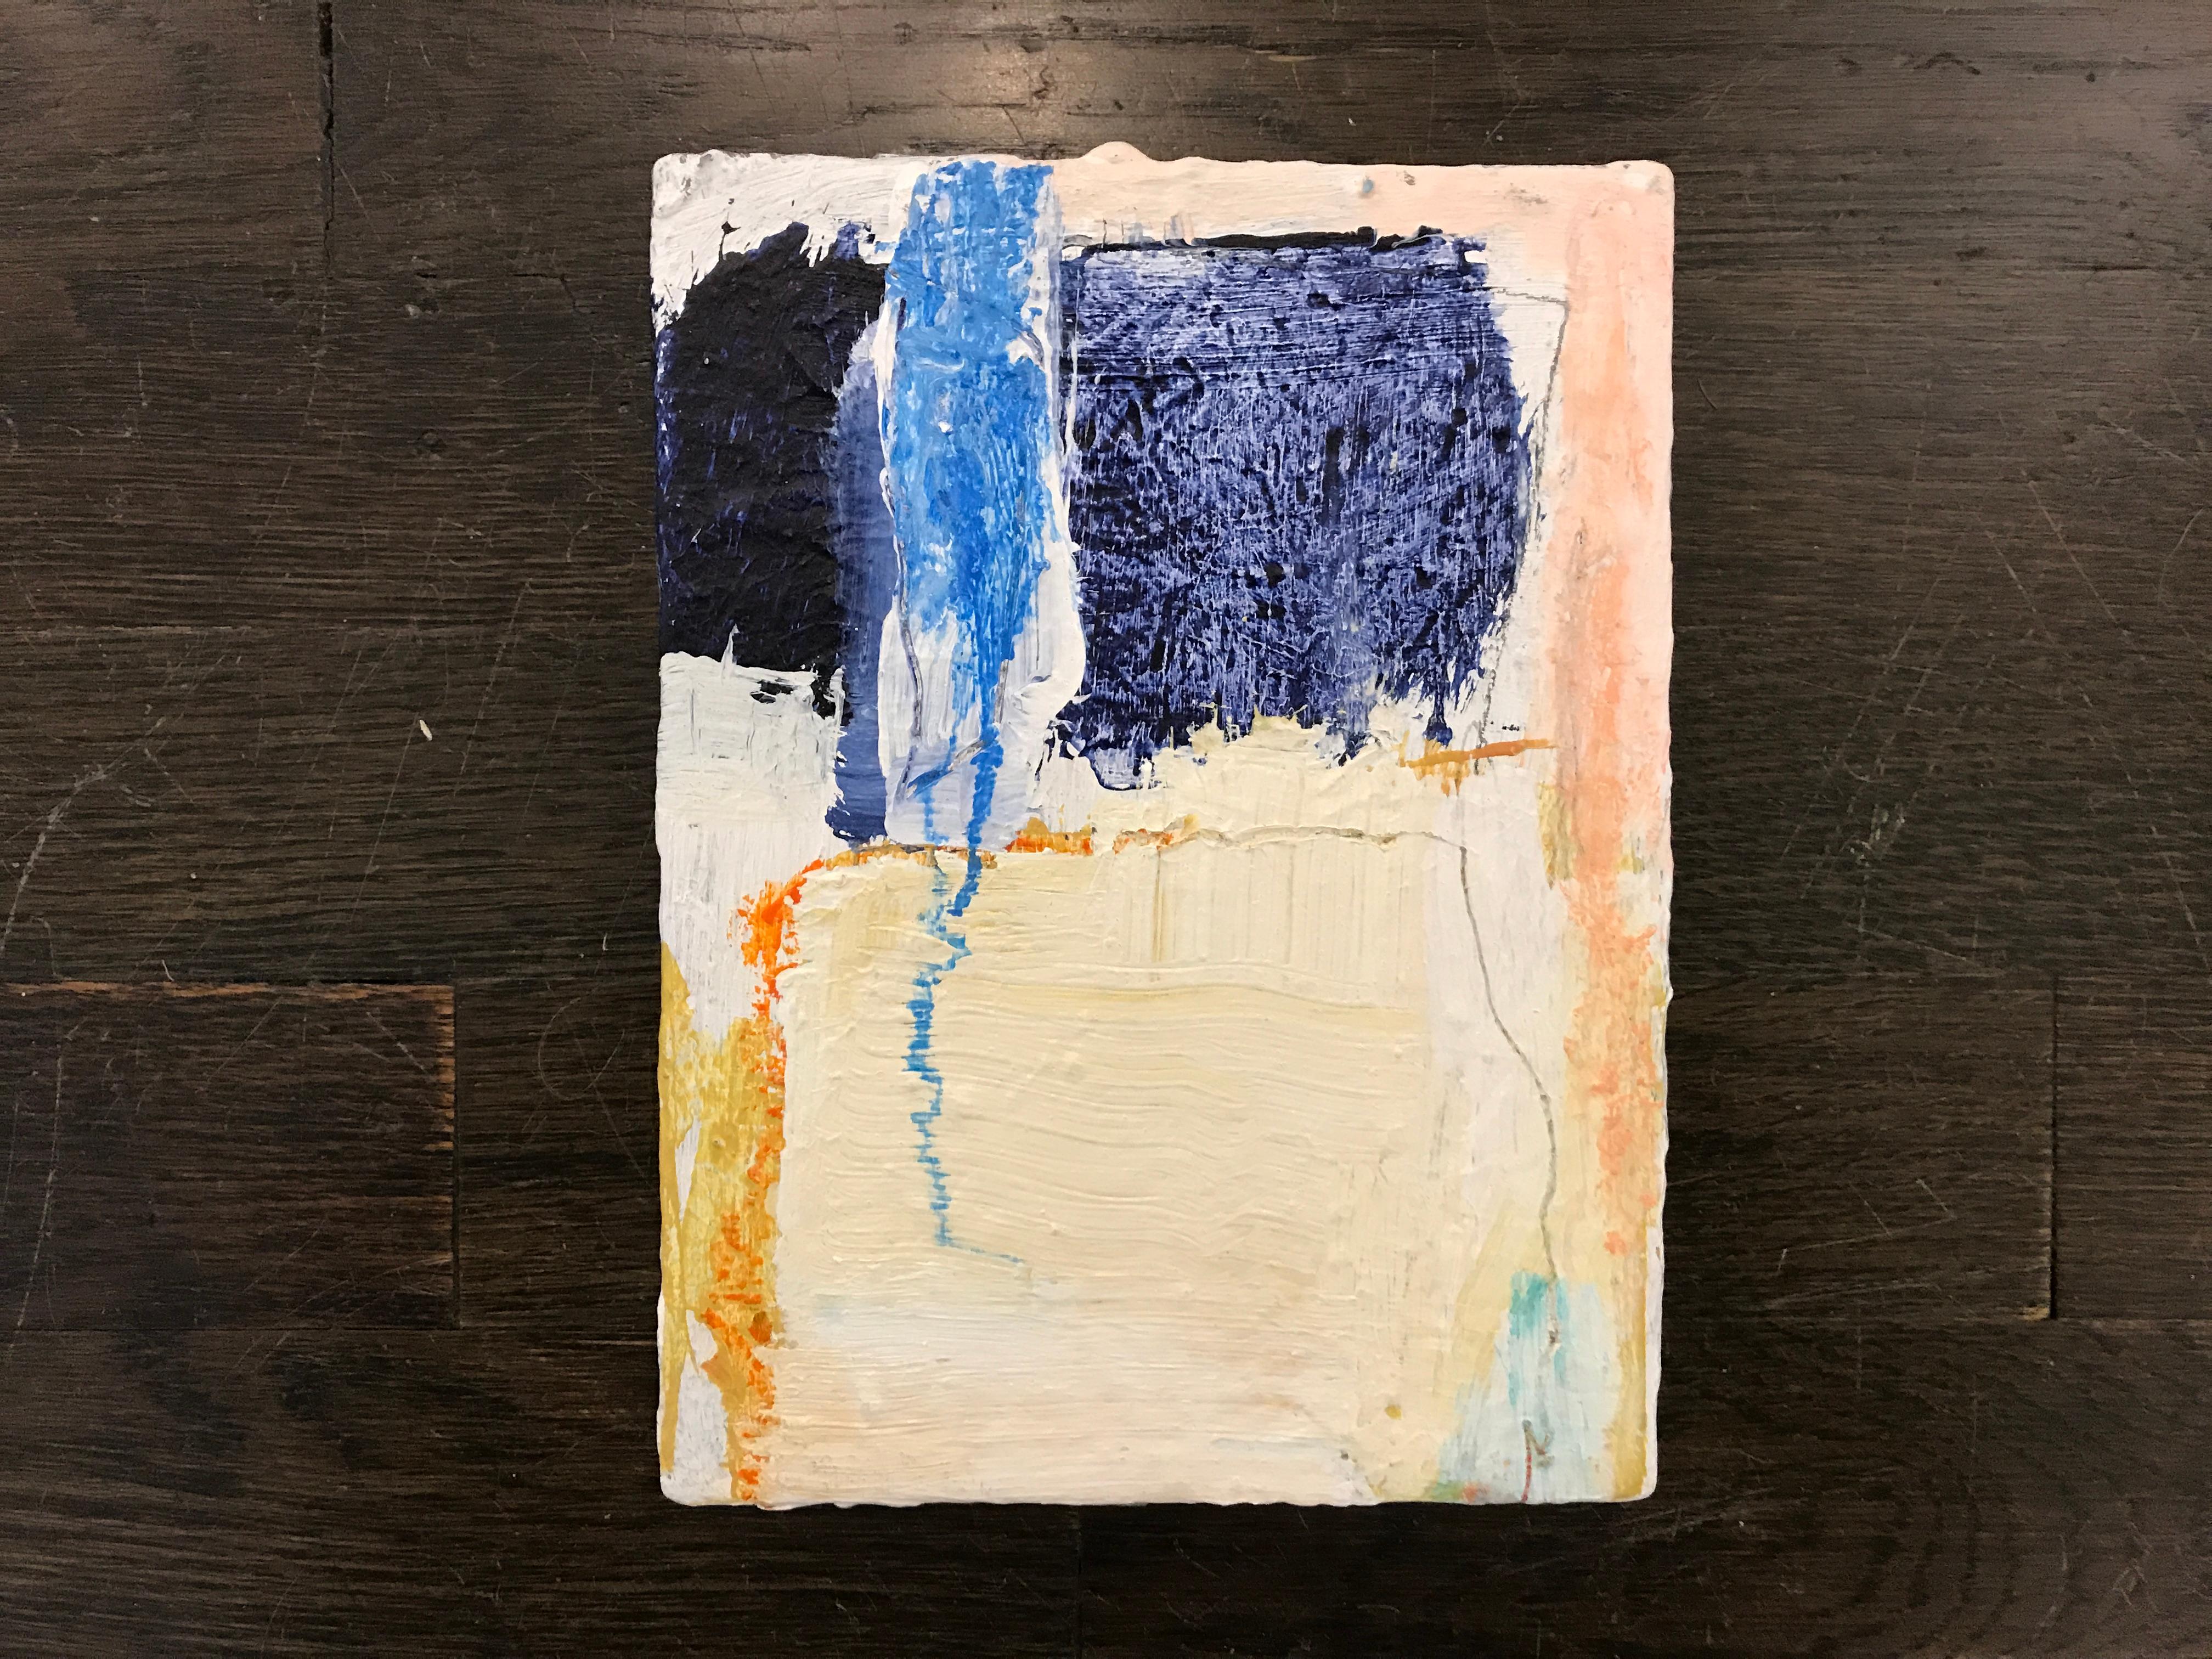 This little abstract painting is part of a 5 piece series, all of which are picture in an included image.  The artist has signed on the back.

Ellen earned her degree in Art Education with a minor in Painting at the Massachusetts College of Art in